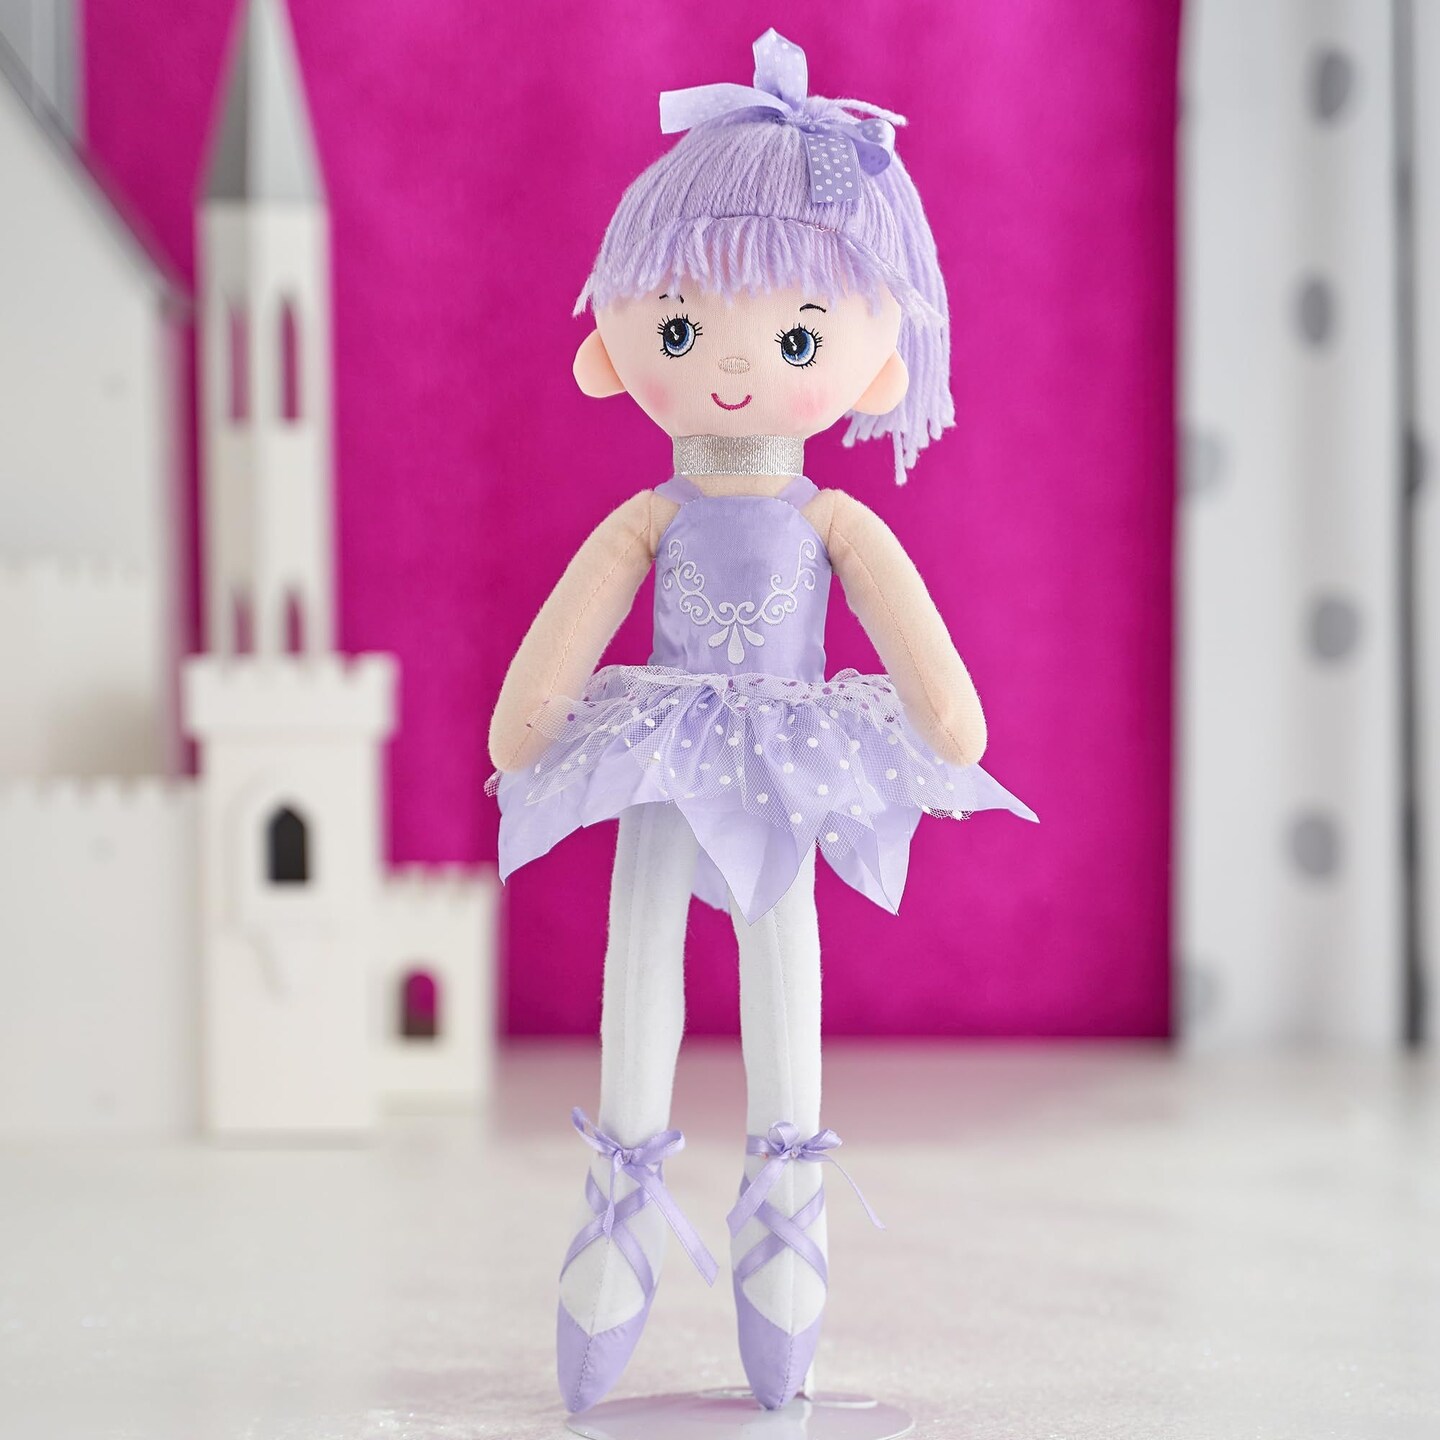 Butterfly Craze Ballerina Dancer Doll - Soft and Cuddly Stuffed Toy Plush, 17 Inches Tall, Ideal Gift for Toddlers &#x26; Little Girls to Embrace Their Inner Dancer &#x26; Unleash the Joy of Ballet, Purple